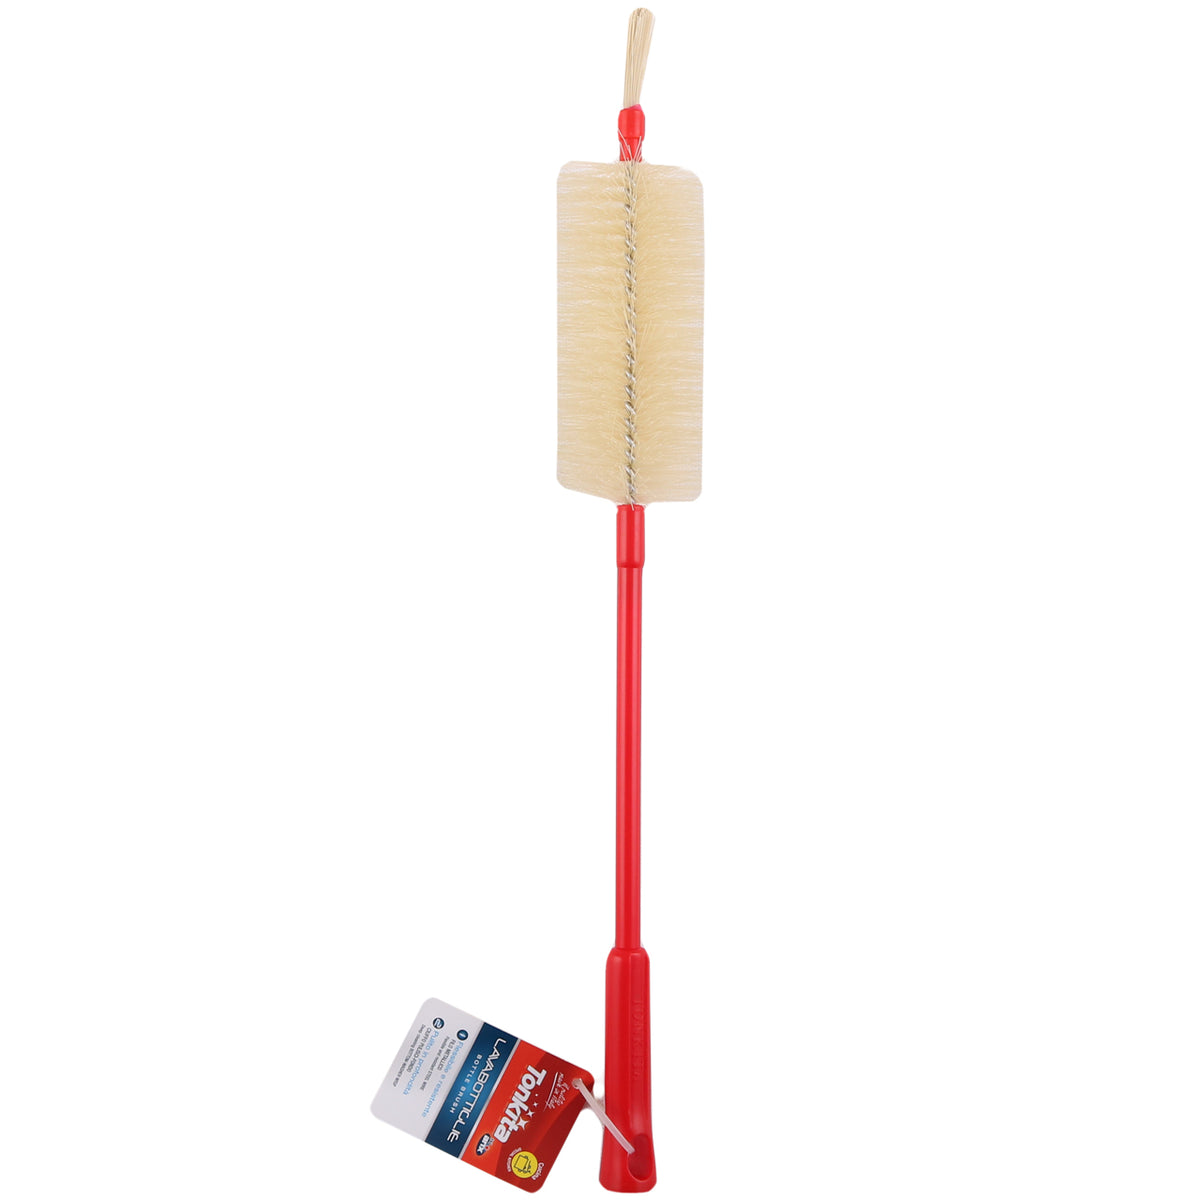 Cleaning Brush, RedA high quality Cleaning Brush